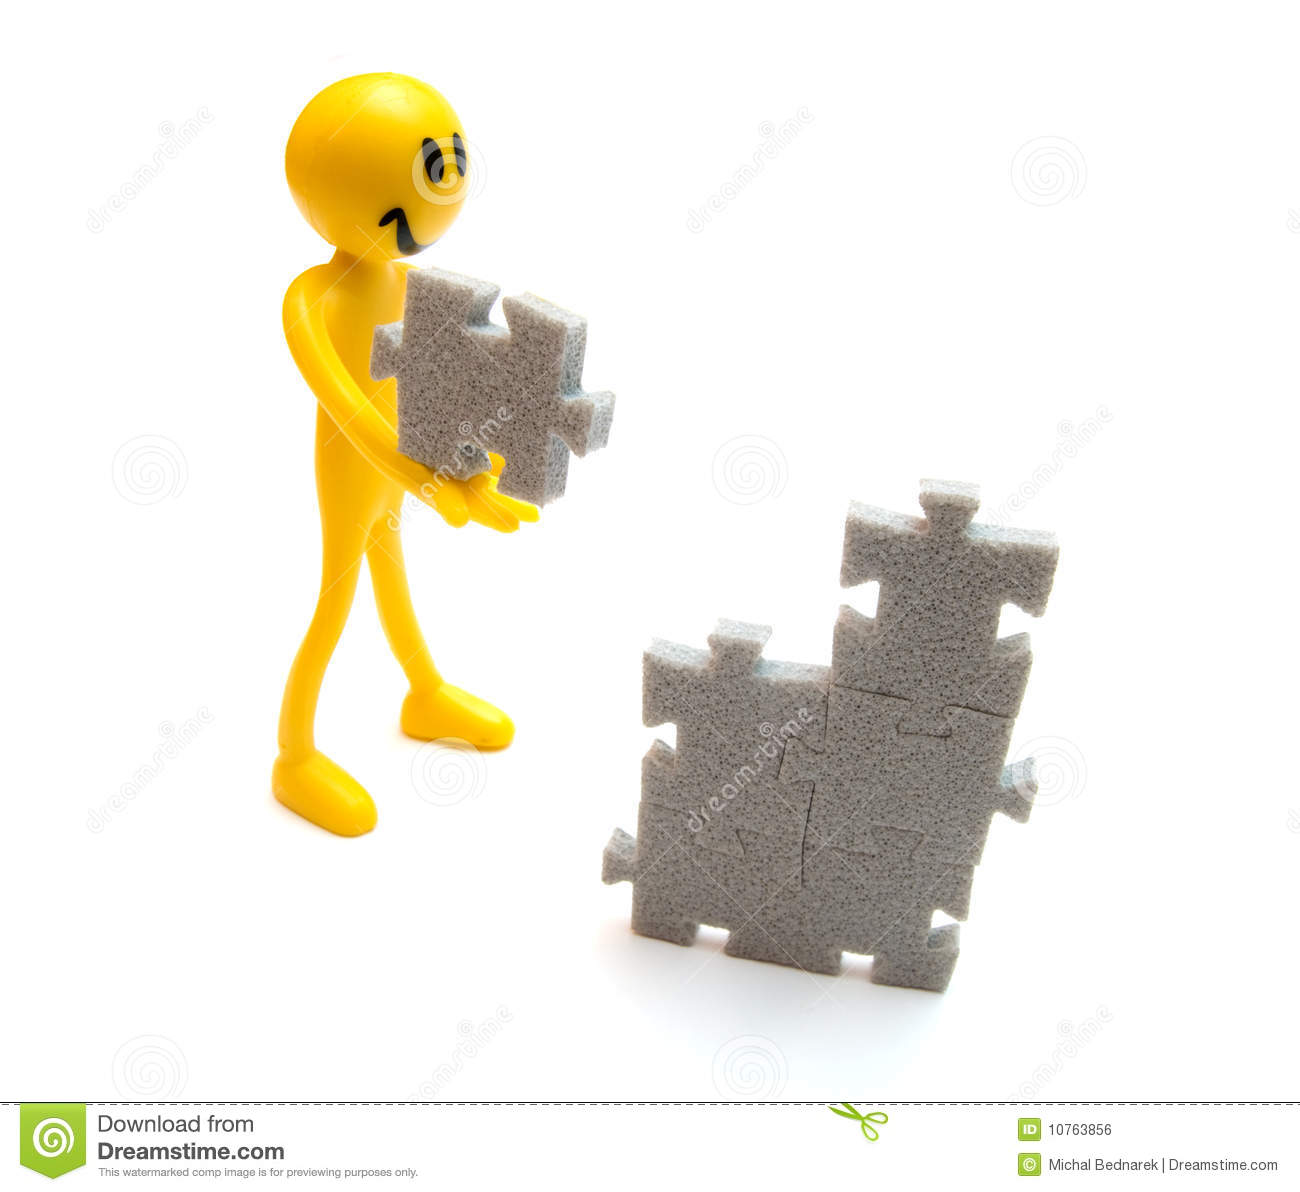 Putting Pieces Together Royalty Free Stock Image   Image  10763856